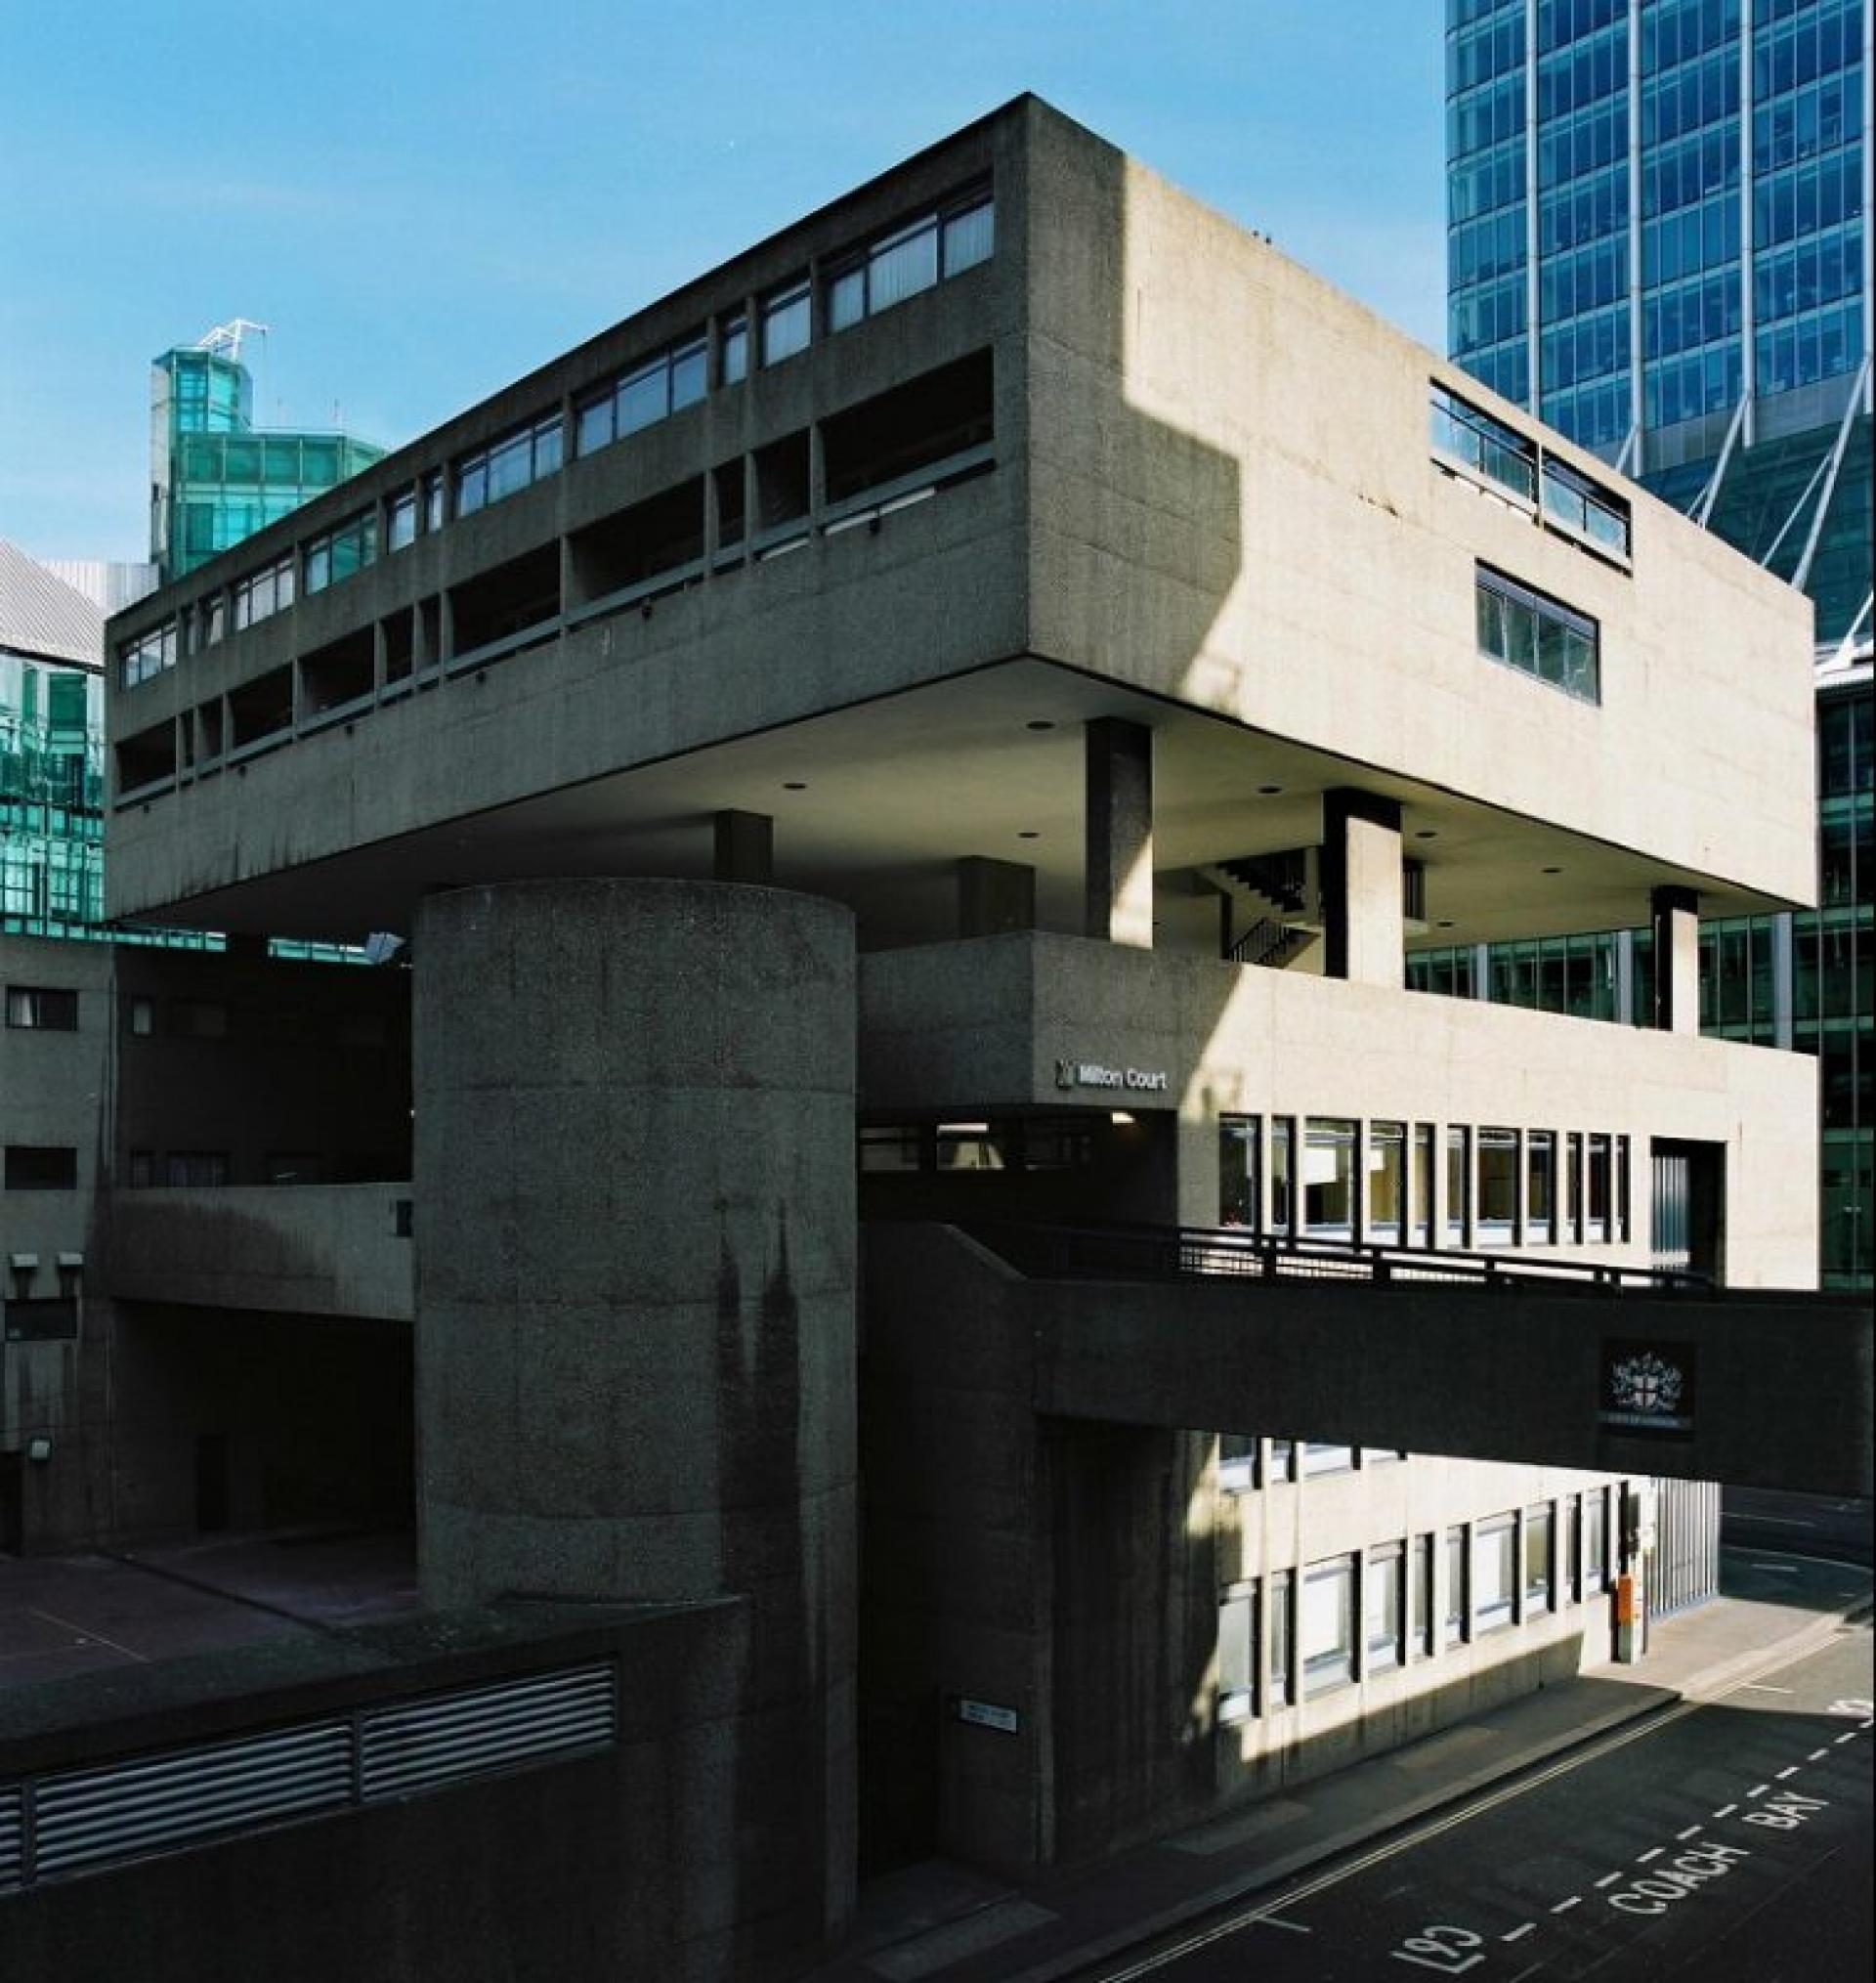 In 2008 Milton Court was demolished after several failed attempts to keep it as an important post-Blitz architecture of London. | Photo via C20 Society